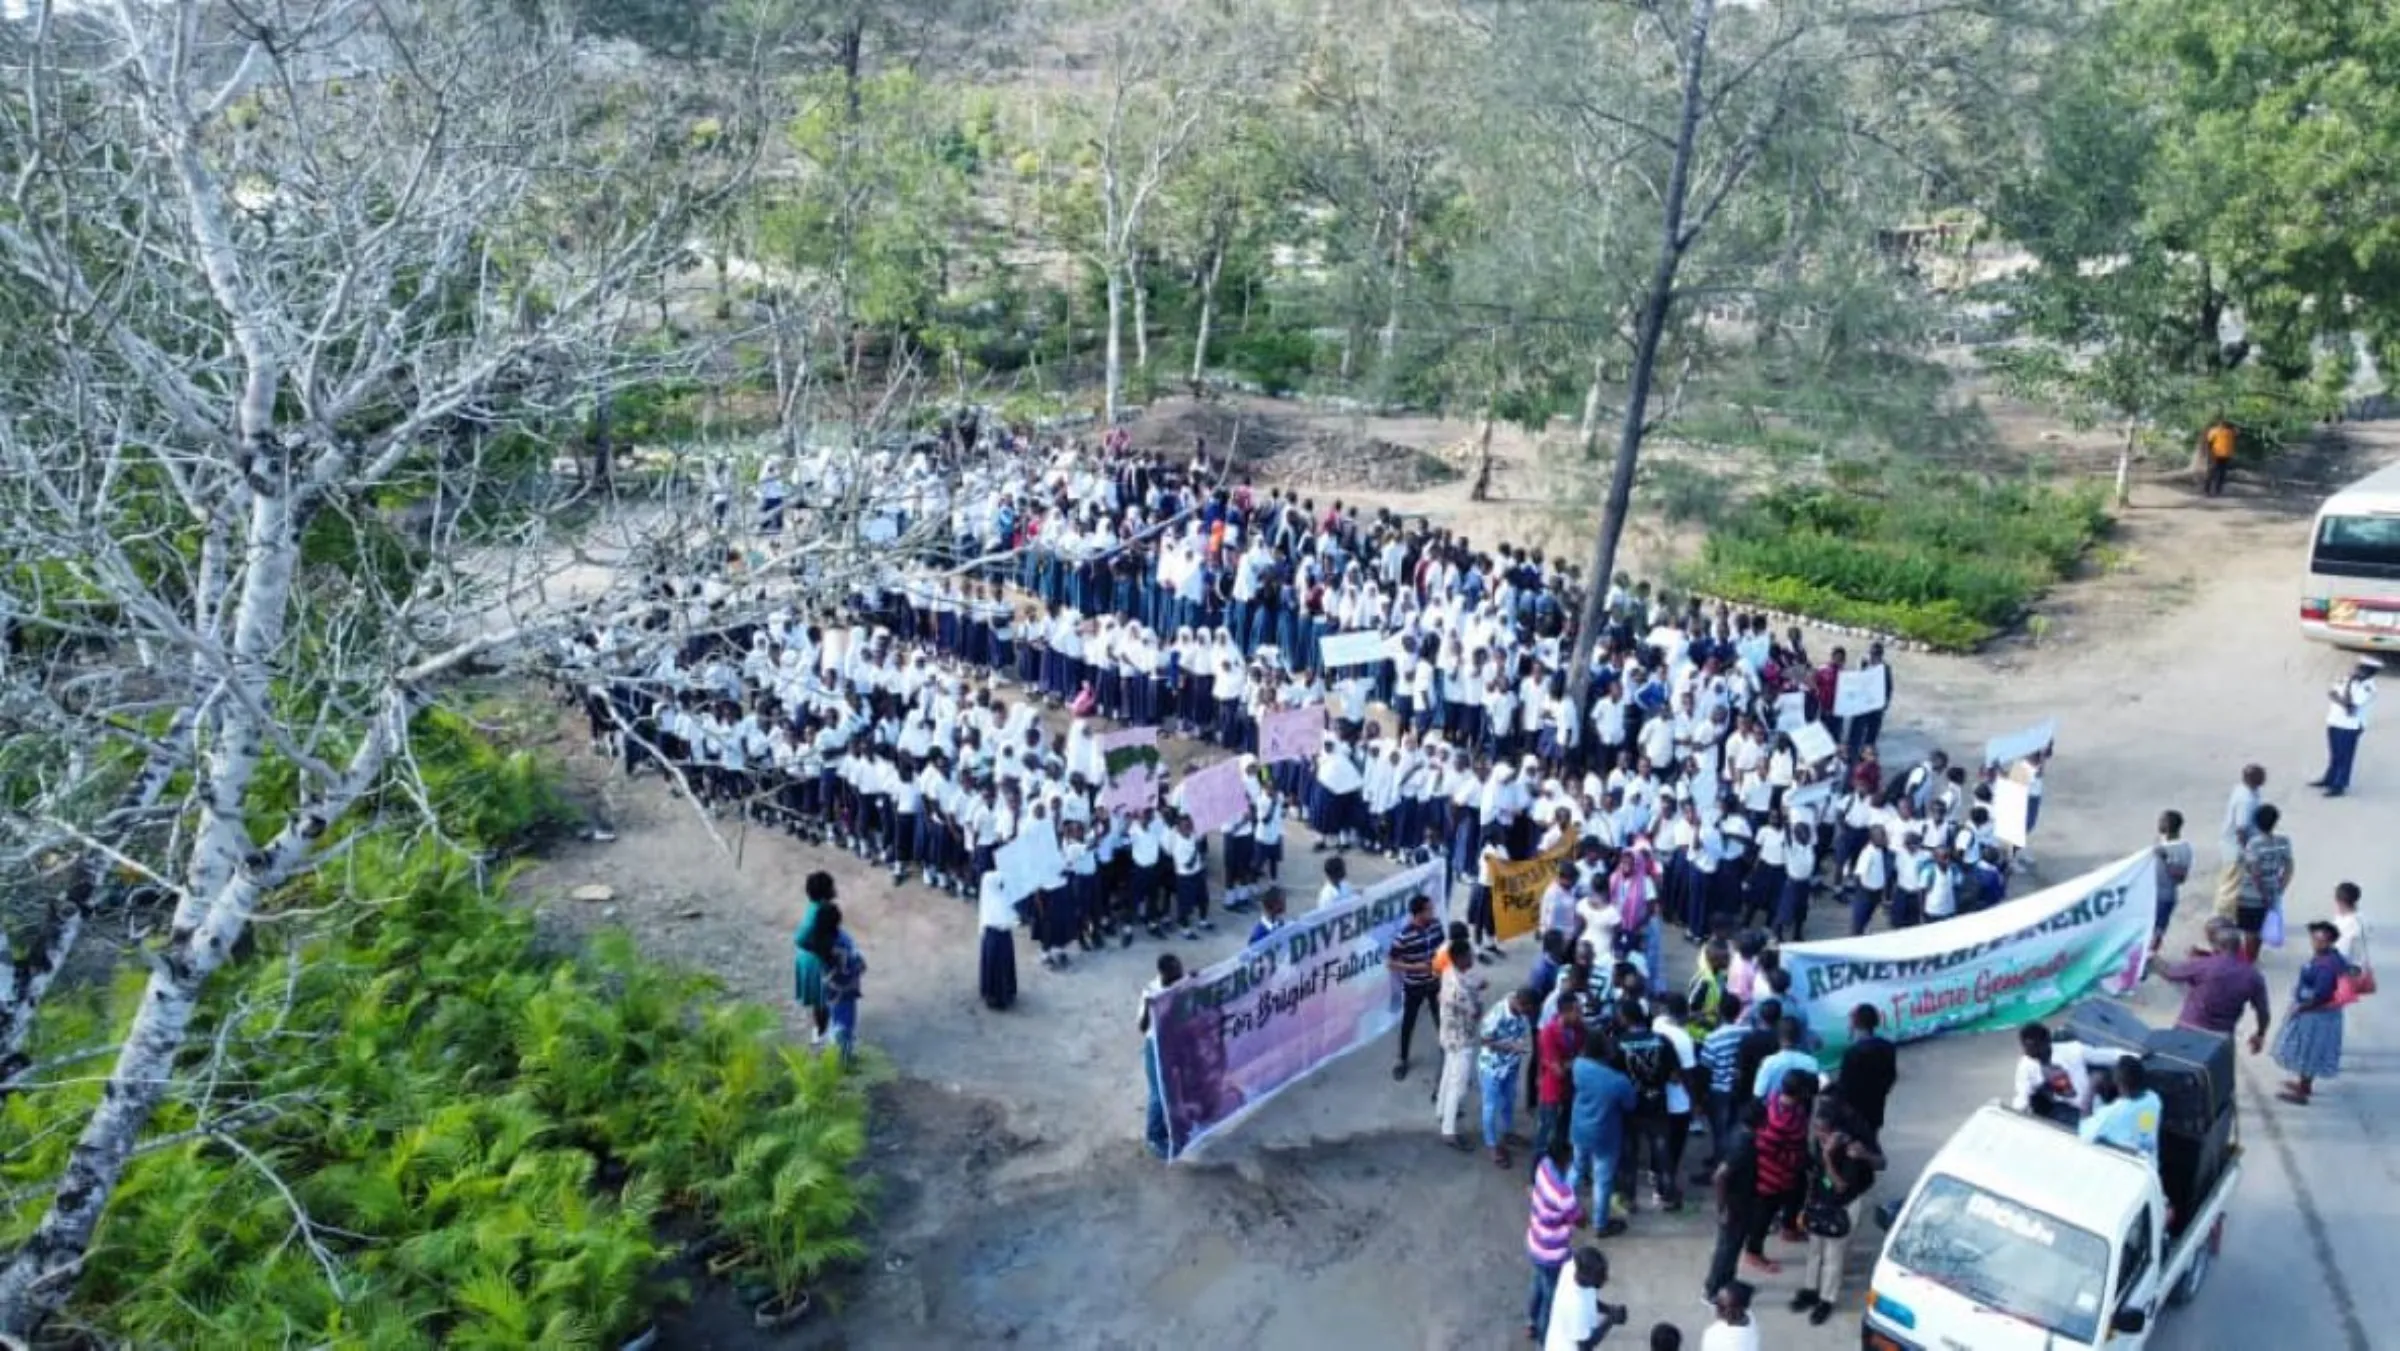 Hundreds of students strike at a climate justice protest in the Kibaha district, Tanzania, 2021